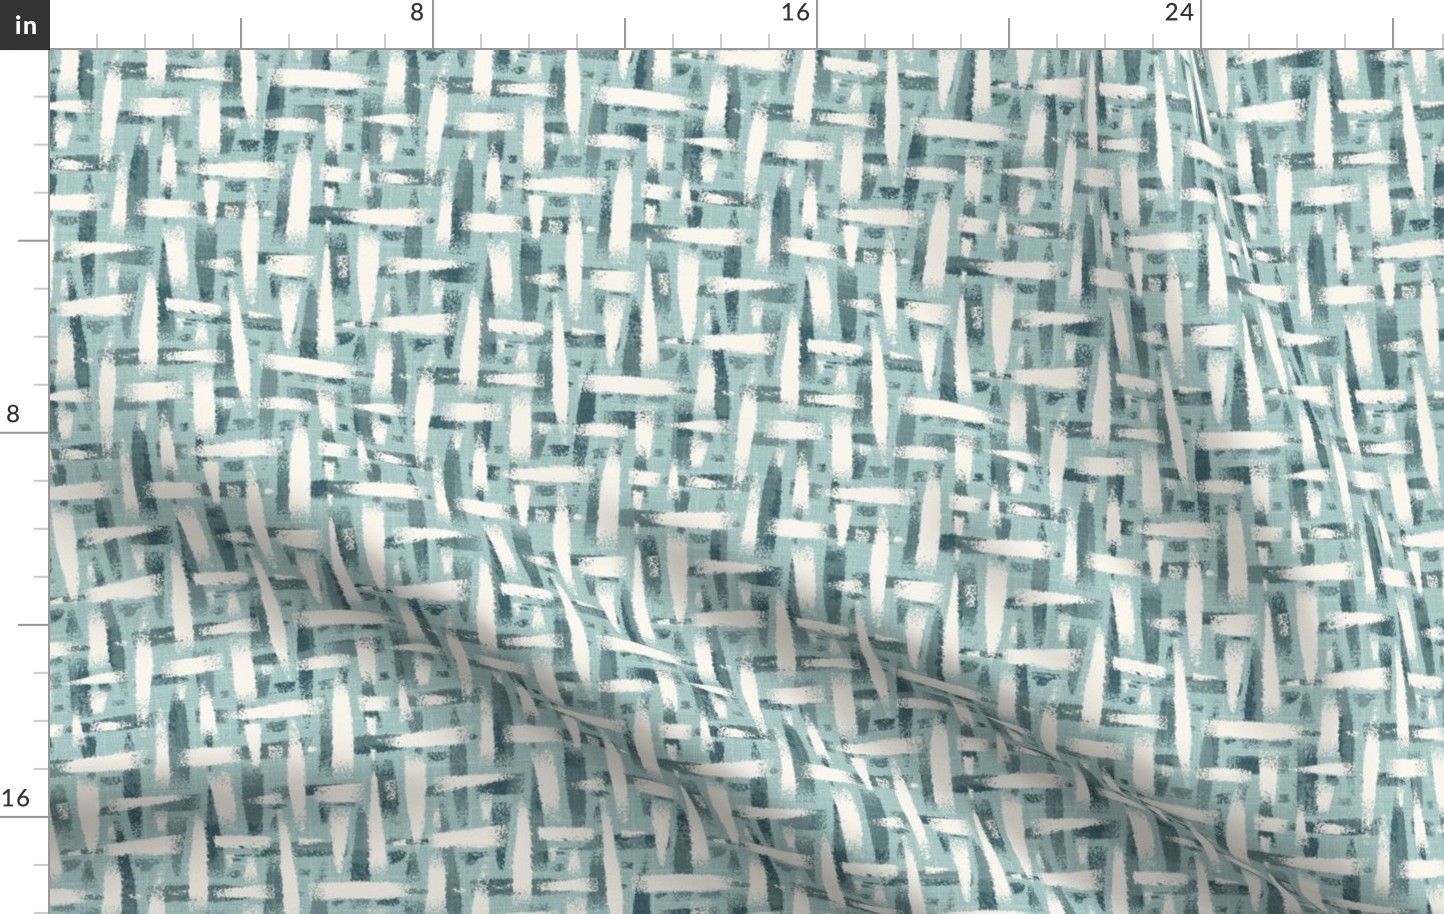 roughly woven textured wallpaper - dusty teal-blue-gray, cream white, gray - medium scale